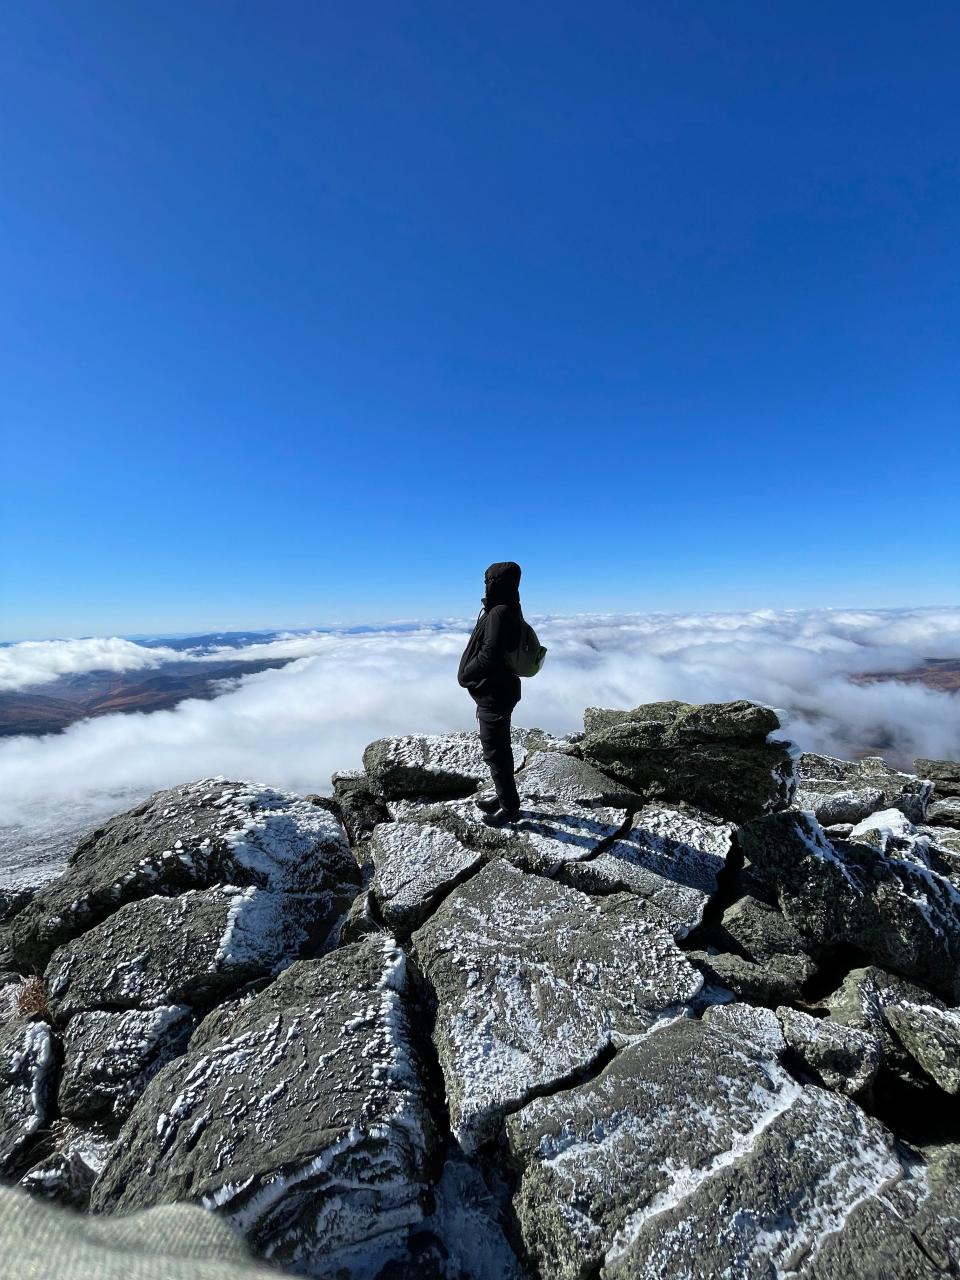 A figure standing on the edge of a mountain backdropped by clouds